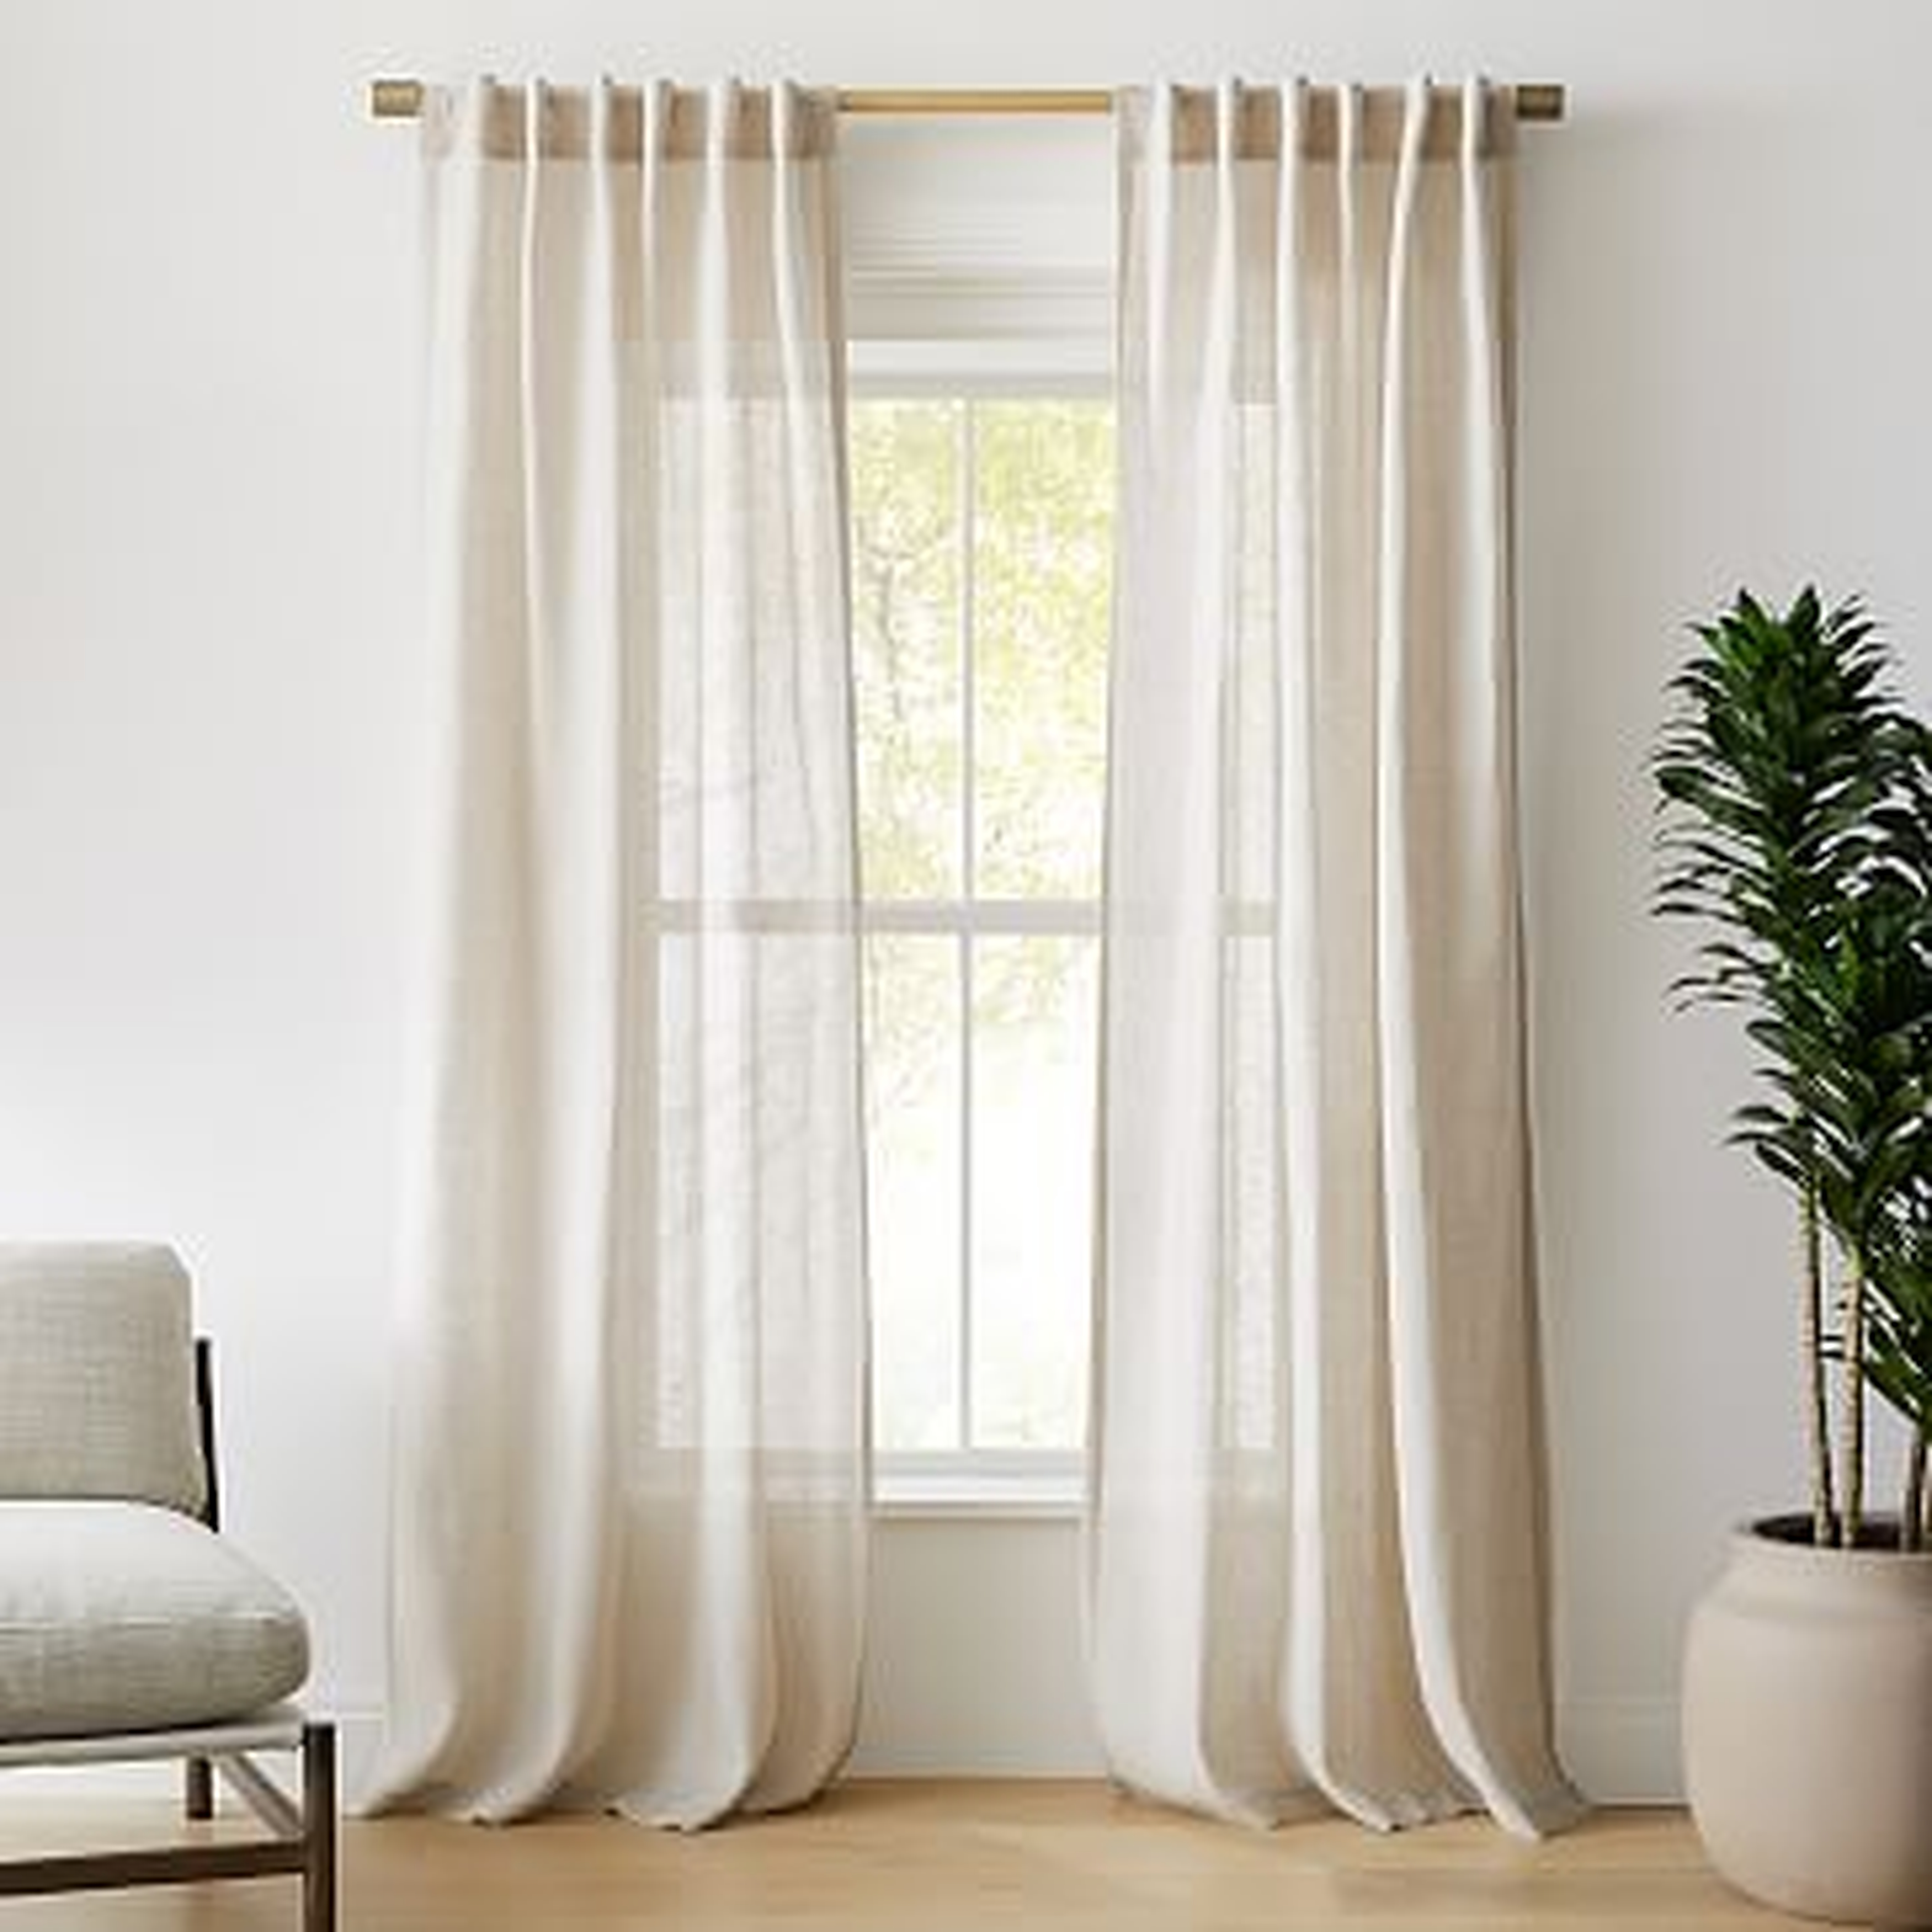 European Flax Linen Curtain With Cotton Lining, Natural, 48"X96", Set Of 2 - West Elm